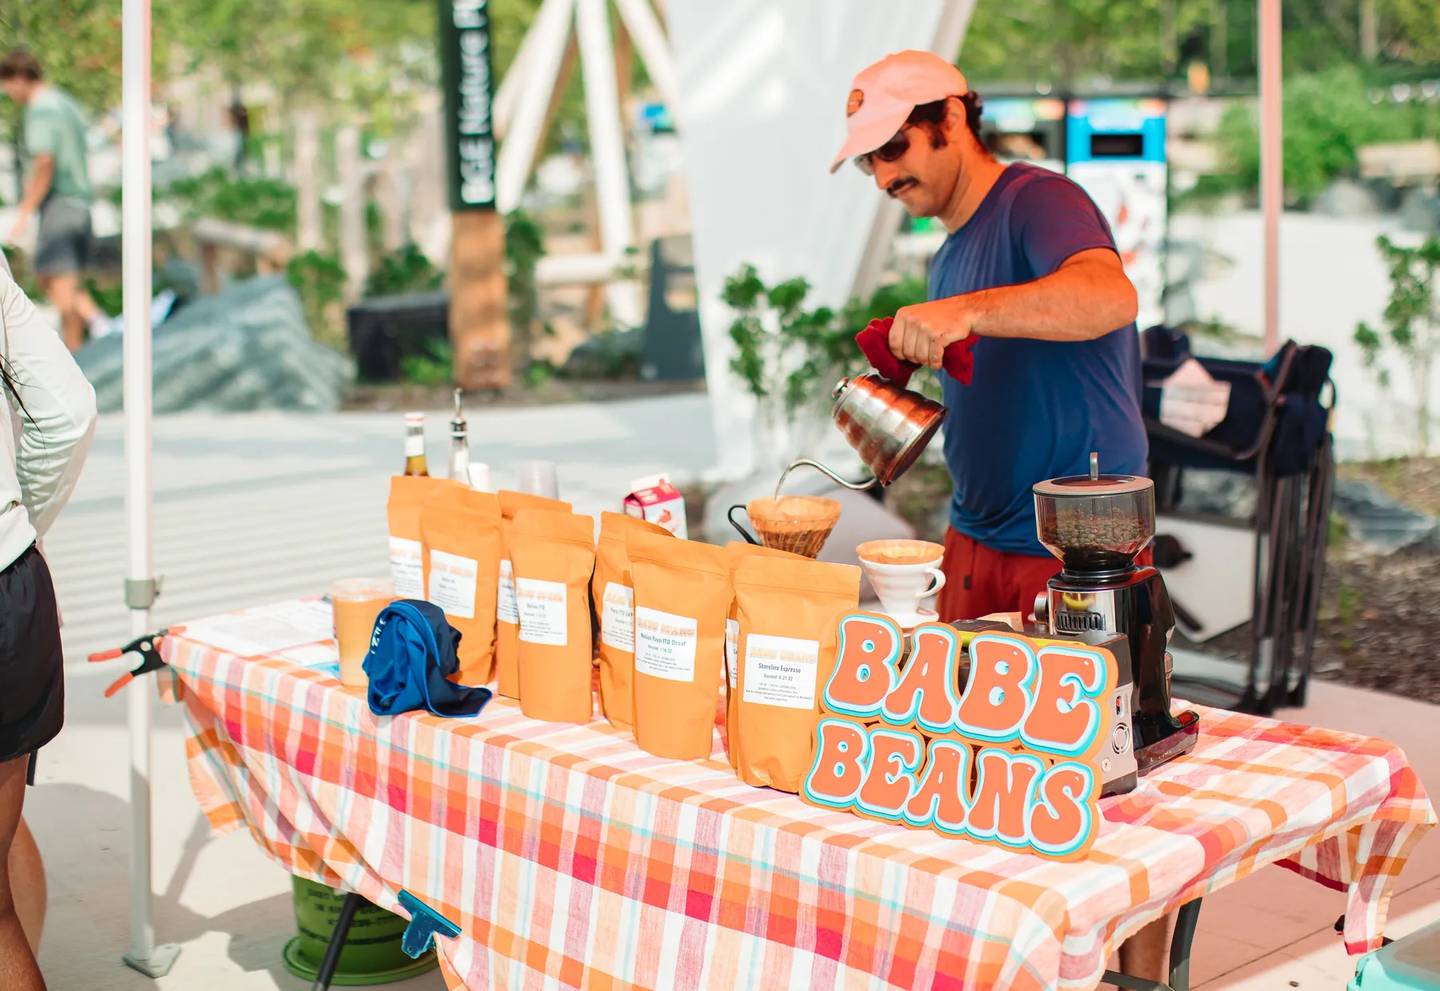 You can purchase espresso drinks, pour overs and whole beans at Babe Beans, one of the new vendors coming to The Baltimore Famers' Market this Sunday.